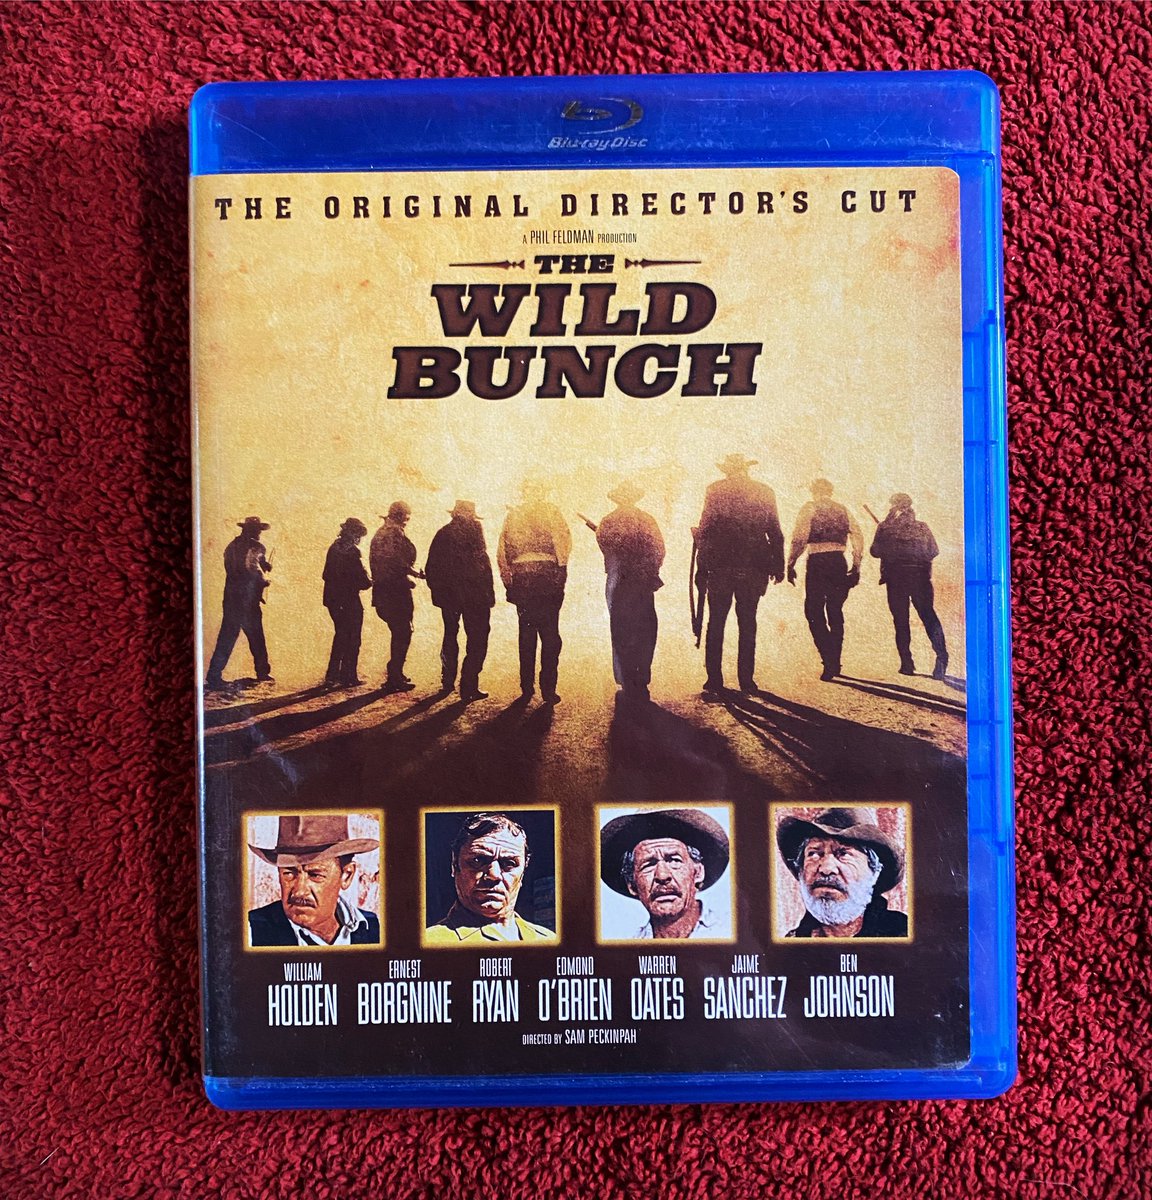 “We all dream of being a child again, even the worst of us.”

Now watching - THE WILD BUNCH (1969) D. Sam Peckinpah 

#thewildbunch #sampeckinpah